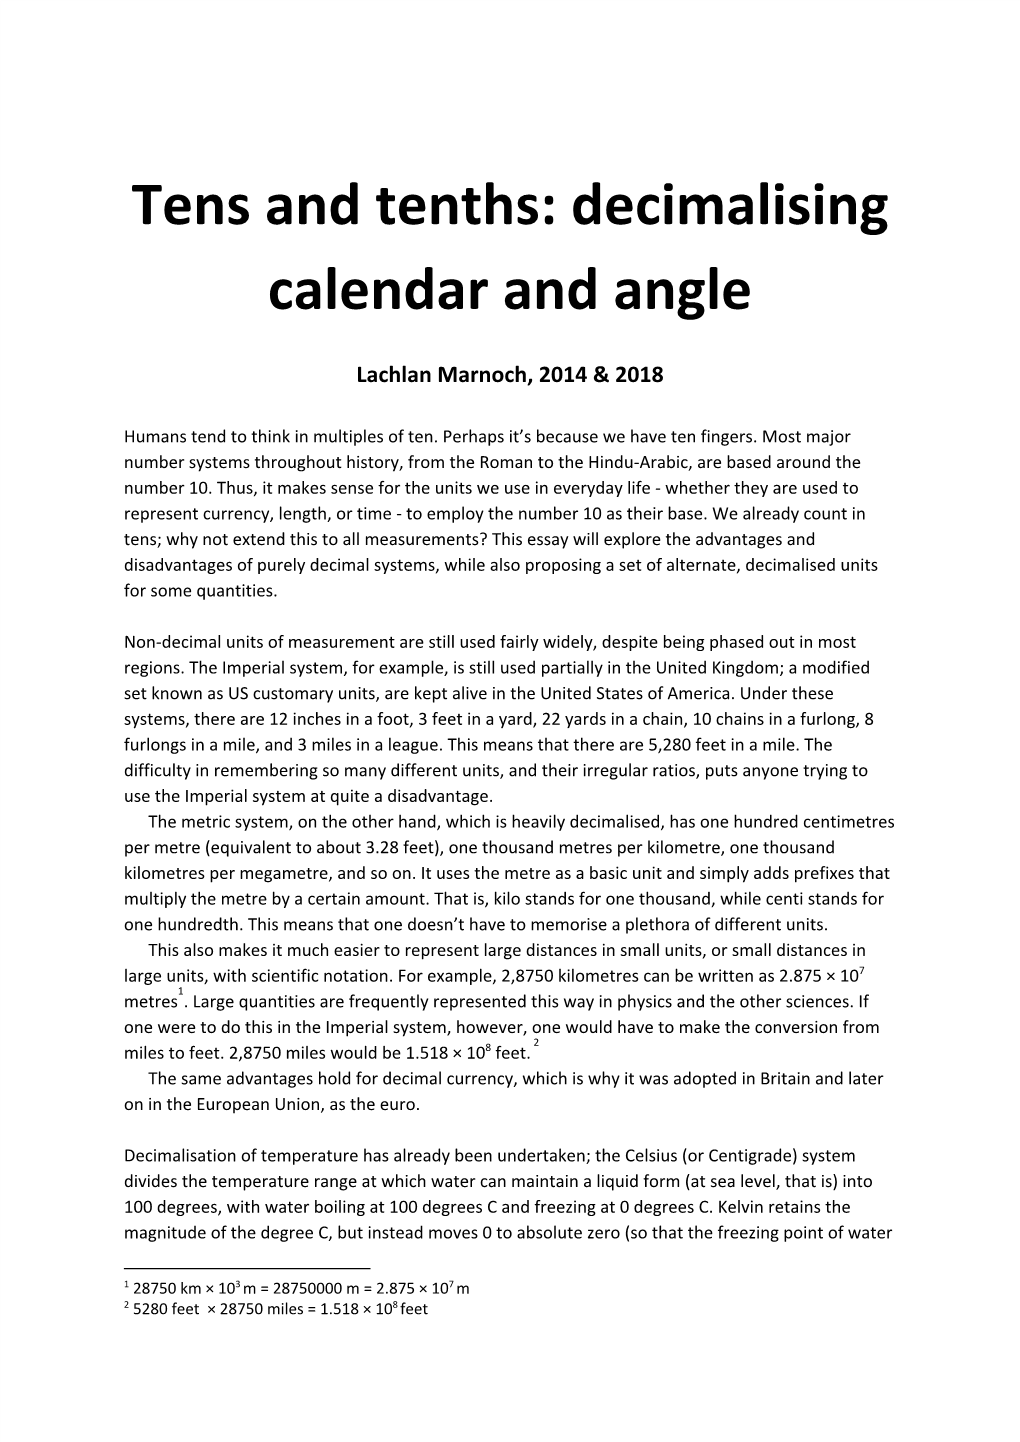 Tens and Tenths: Decimalising Calendar and Angle